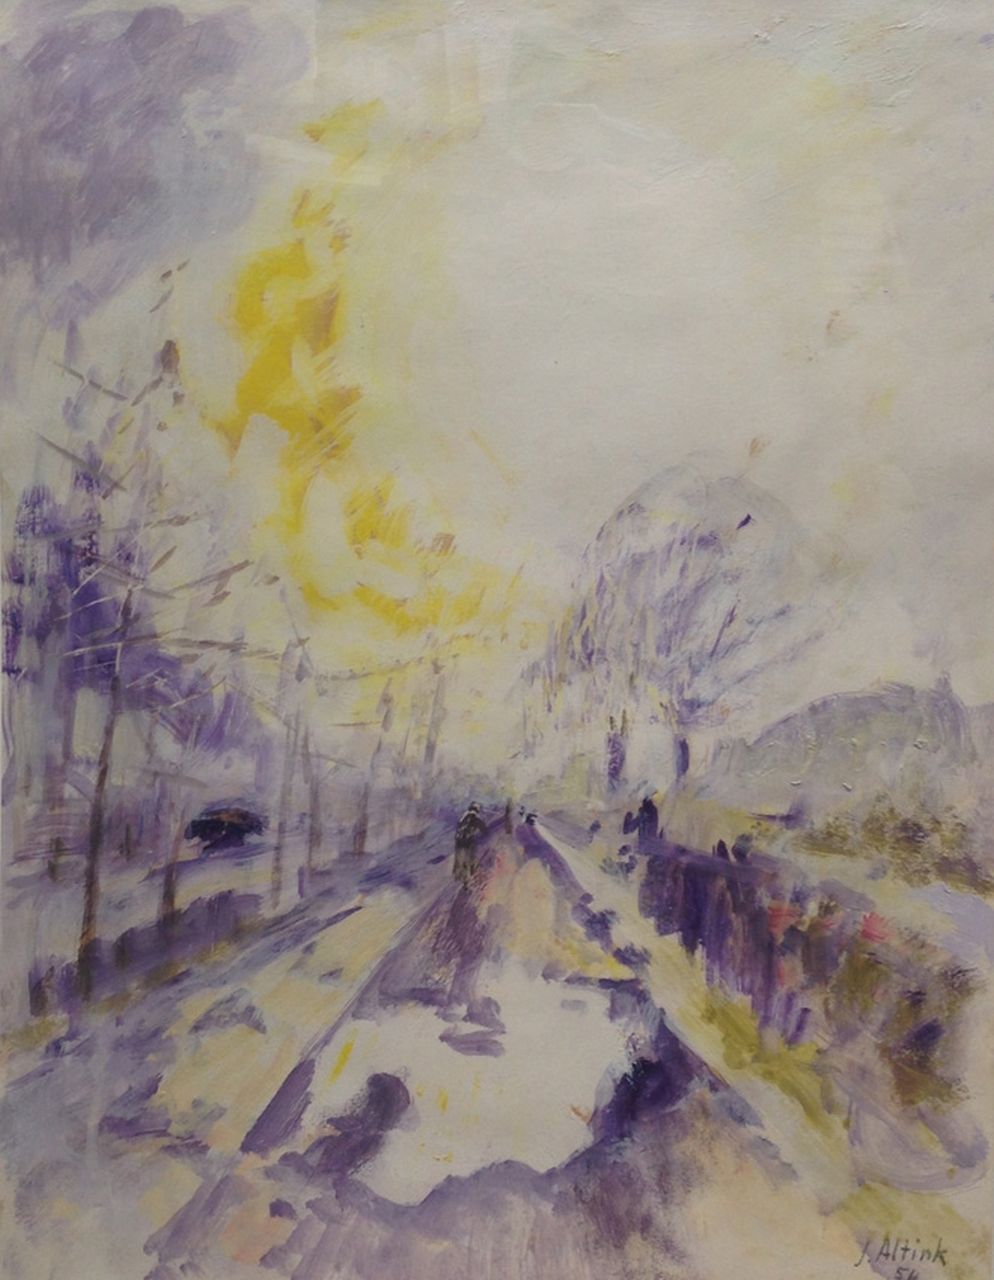 Altink J.  | Jan Altink, Purple road, gouache on paper 65.0 x 49.9 cm, signed l.r. and dated '54